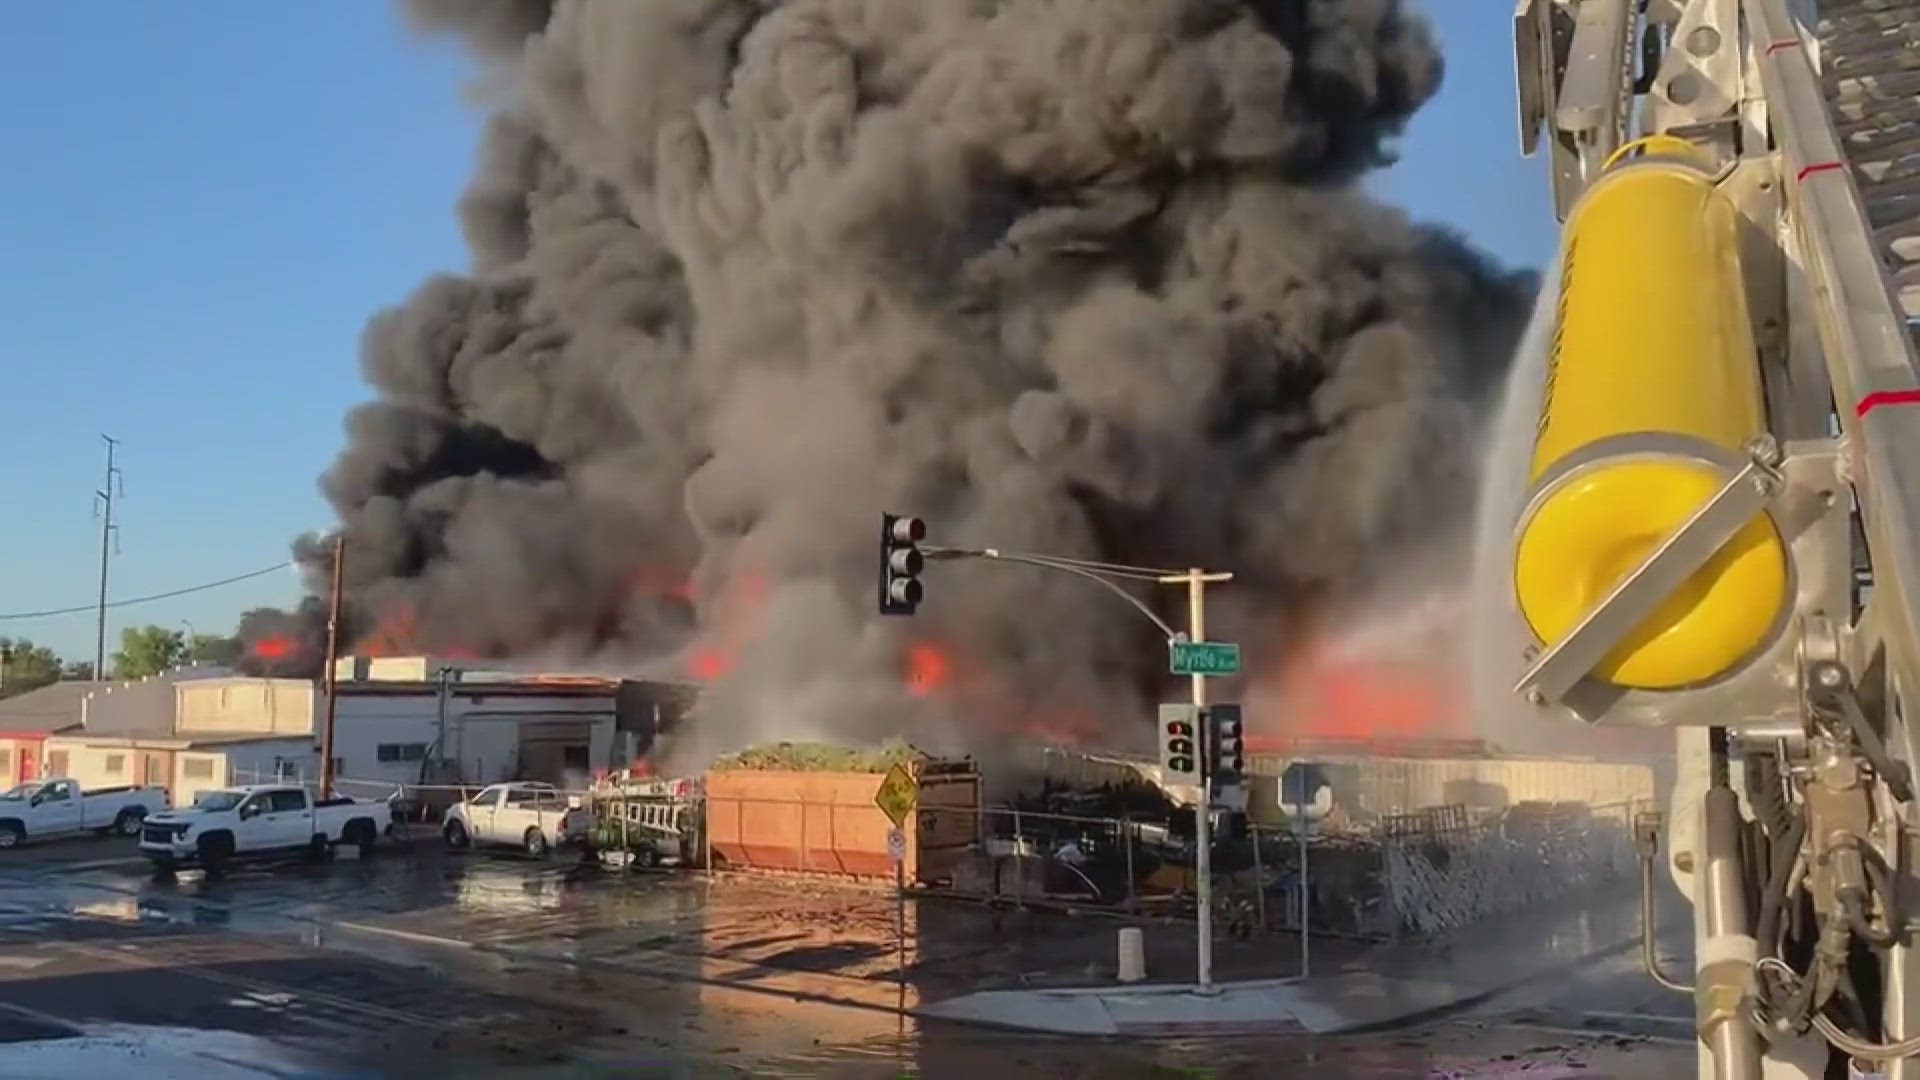 Fire officials said a tanker filled with vegetable oil exploded, sparking a massive fire in Glendale.